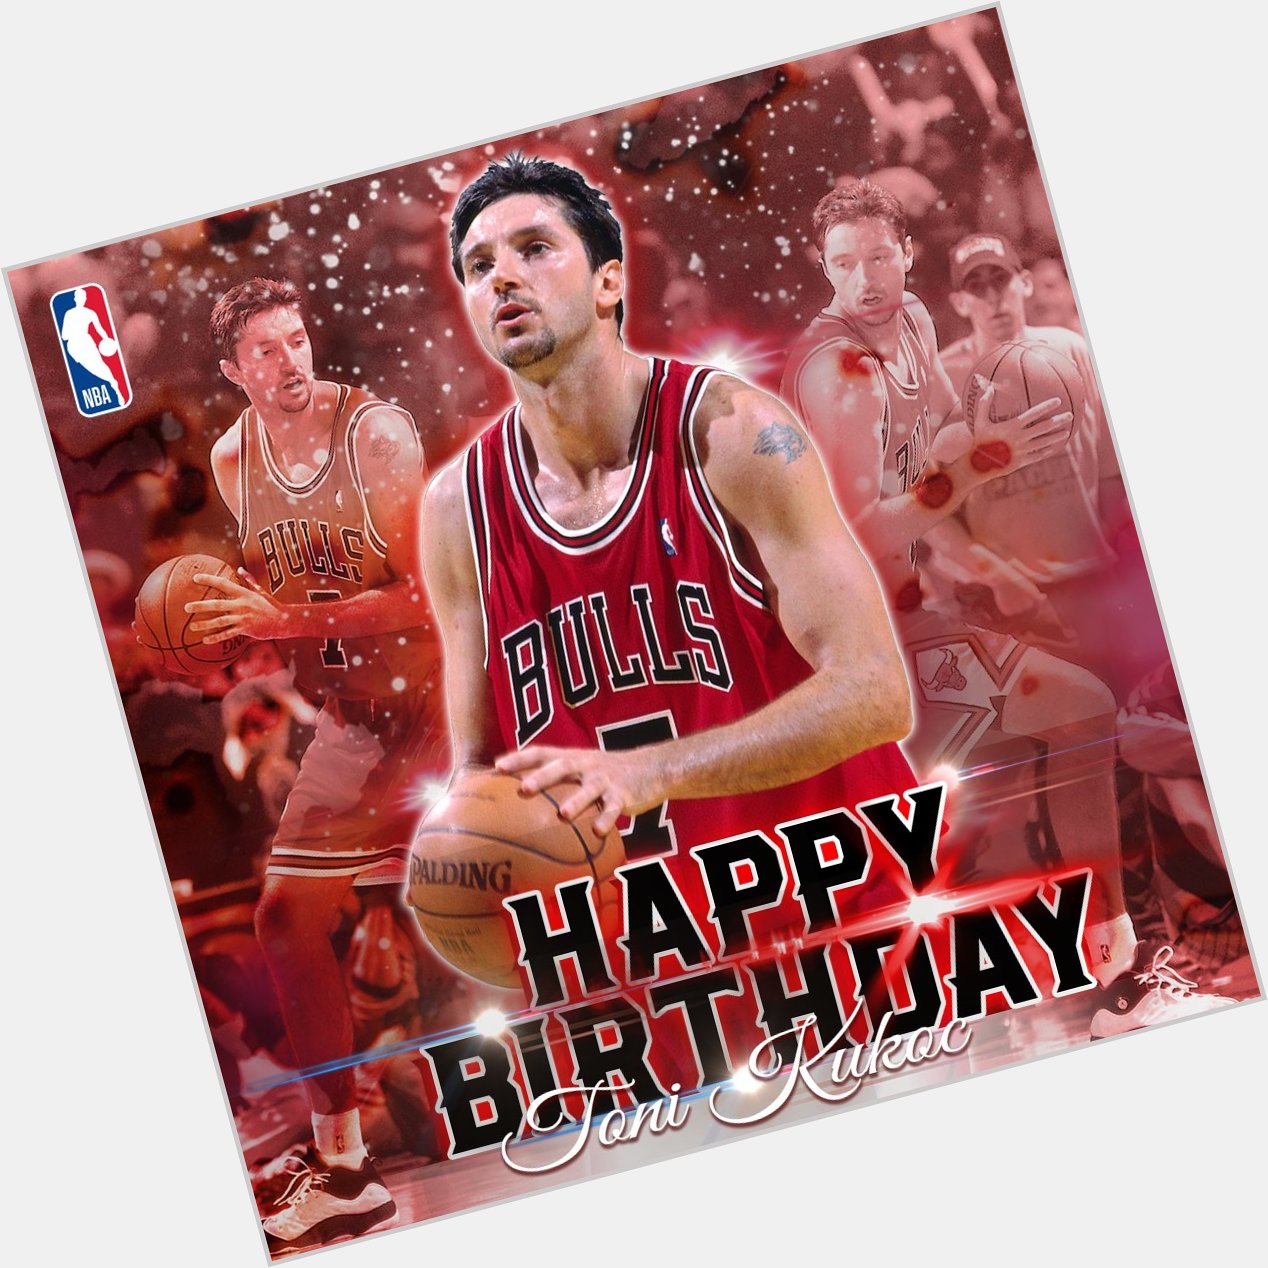 Happy birthday to 3 time NBA champion and former player, Toni Kukoc 